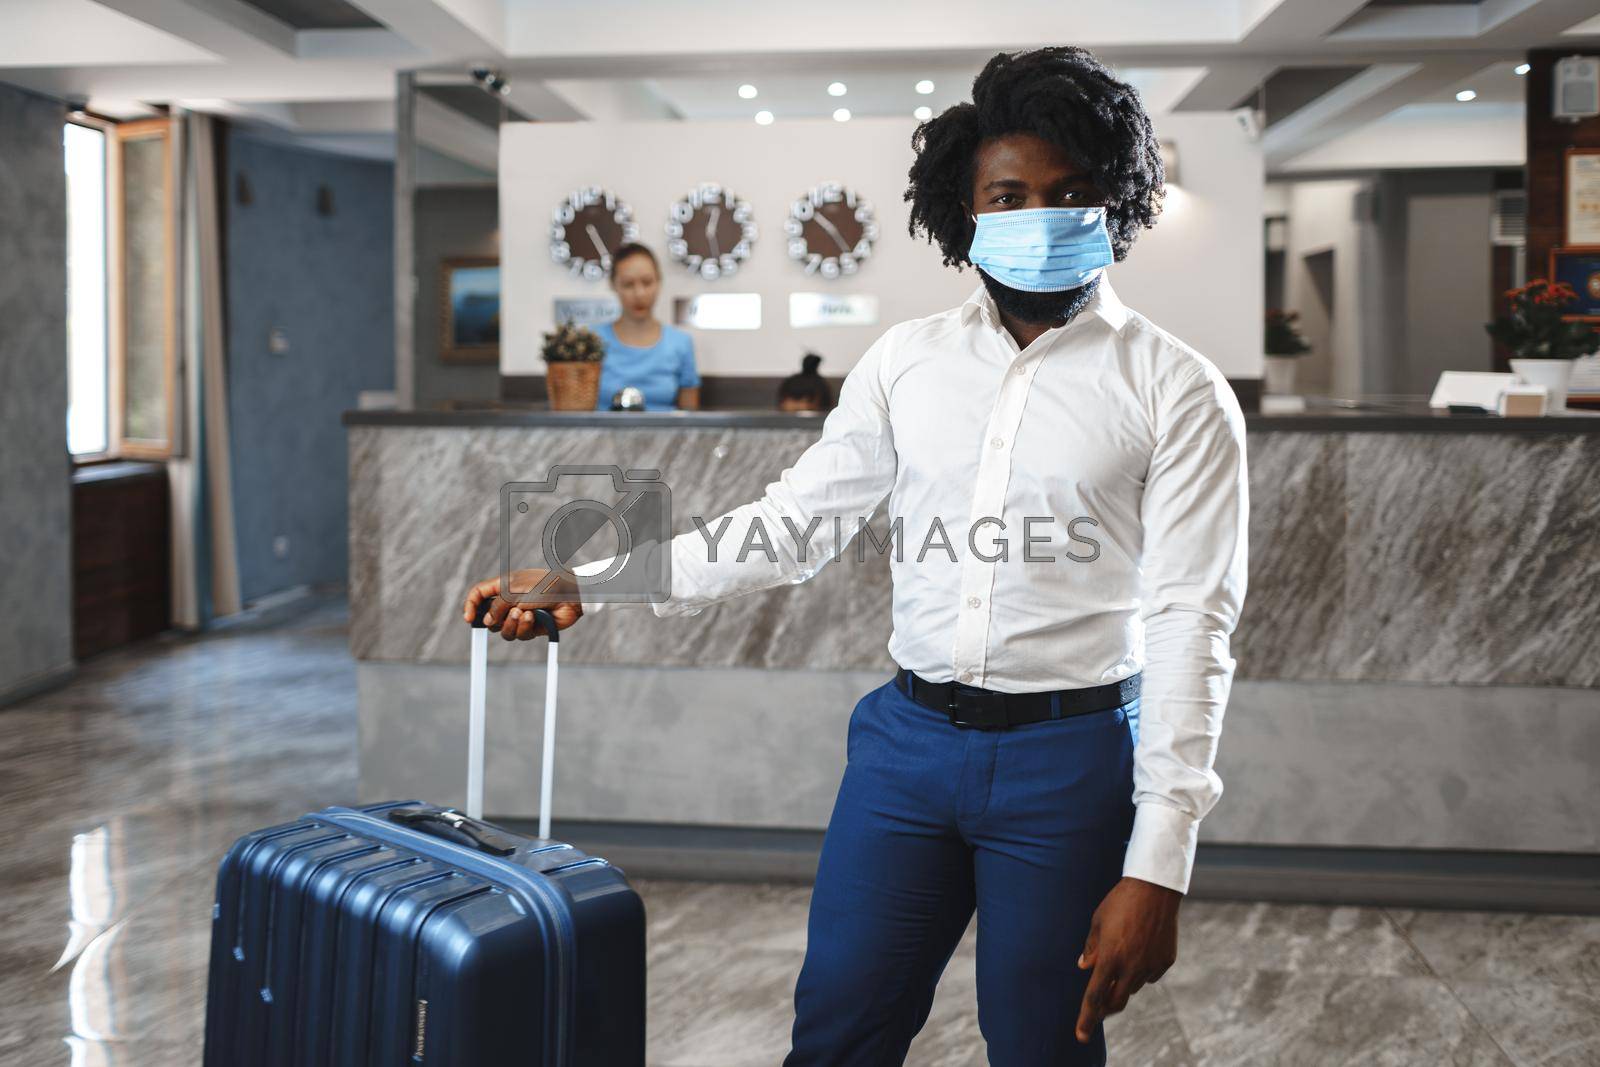 Royalty free image of African man hotel guest with suitcase wearing protective mask to protect from coronavirus by Fabrikasimf